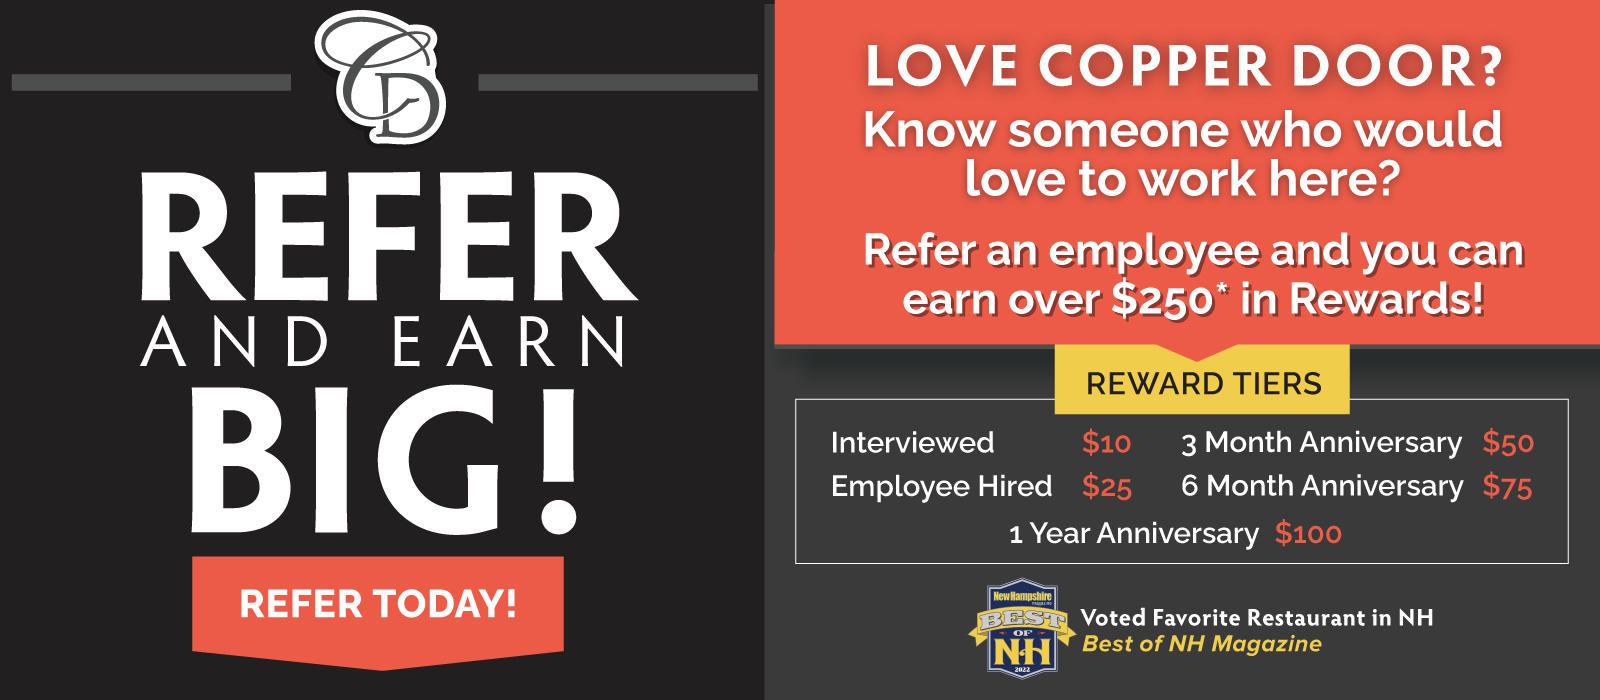 Refer an employee & you could earn over $250*